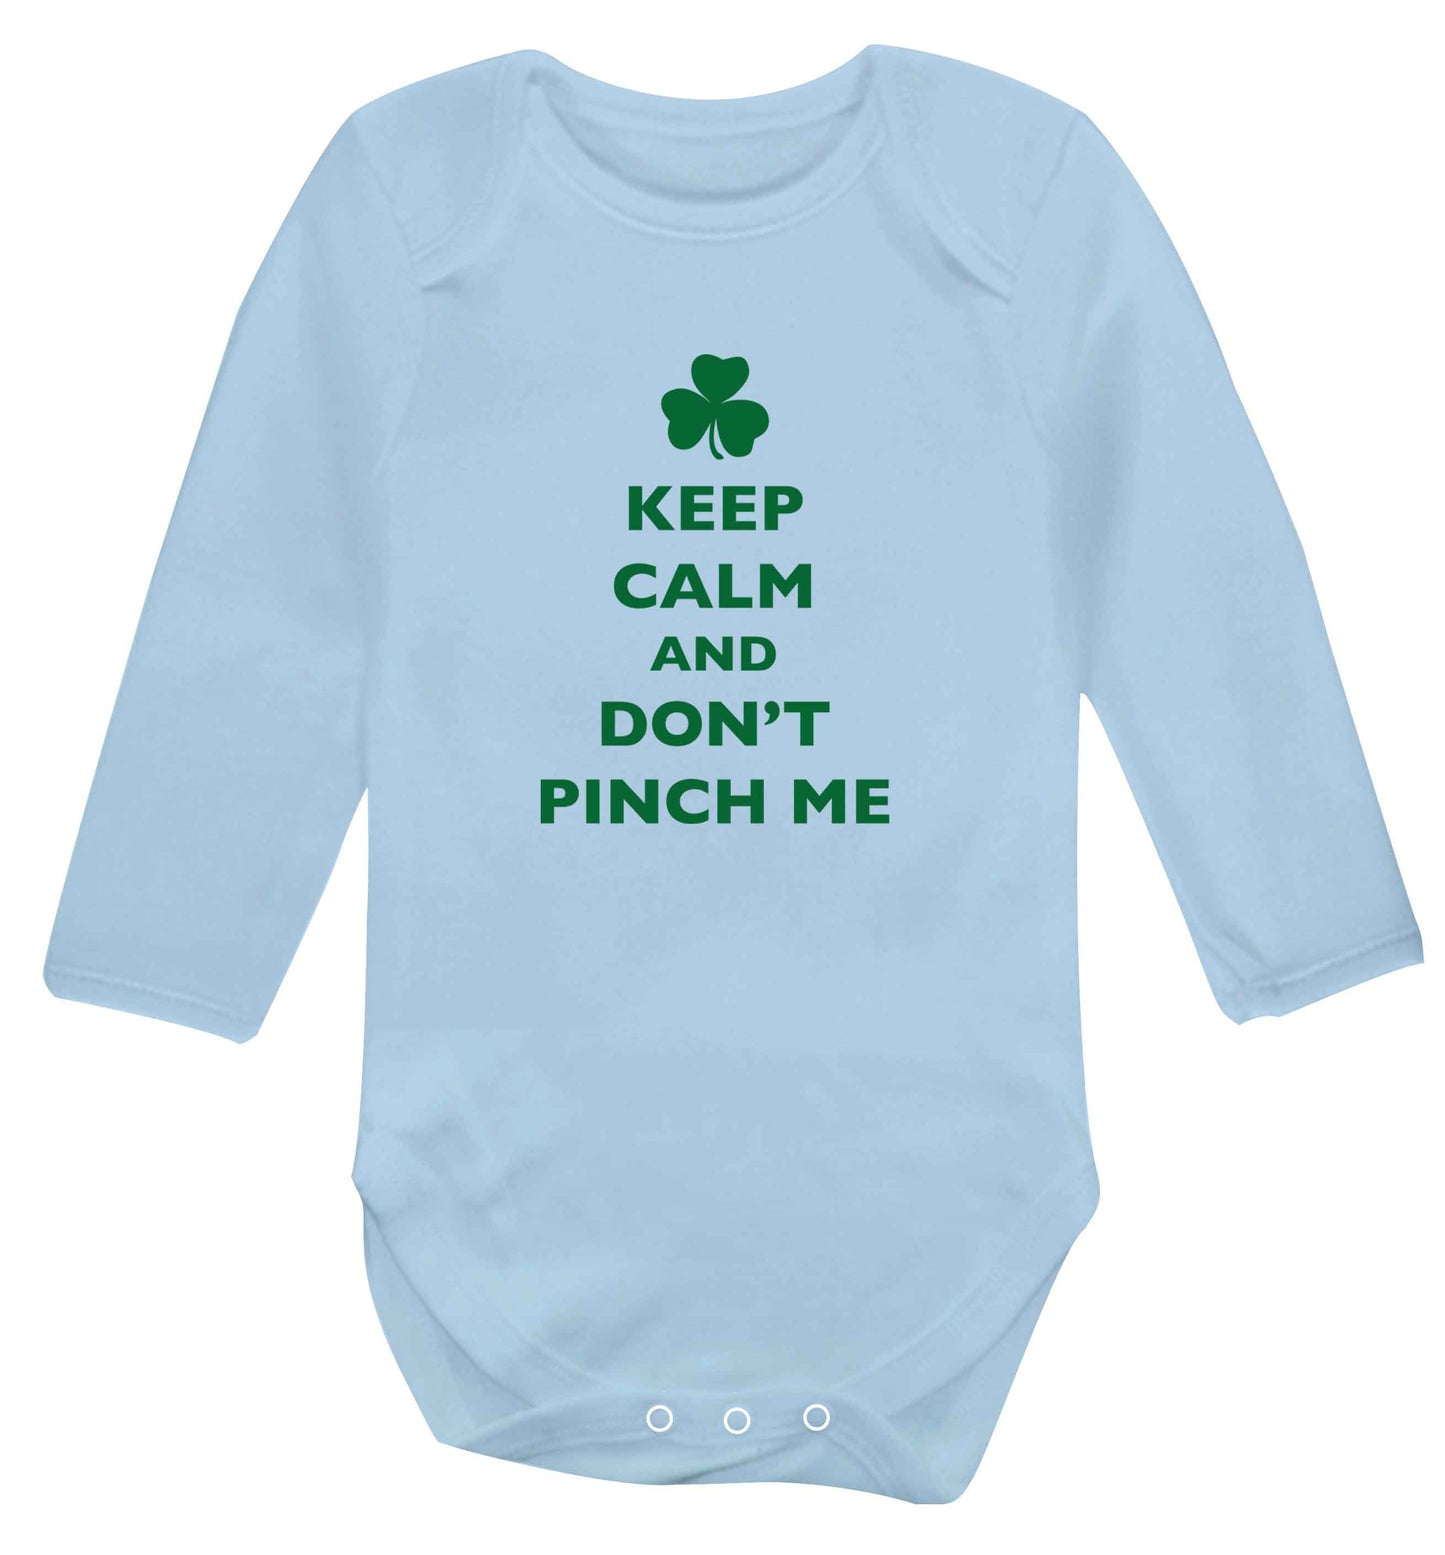 Keep calm and don't pinch me baby vest long sleeved pale blue 6-12 months